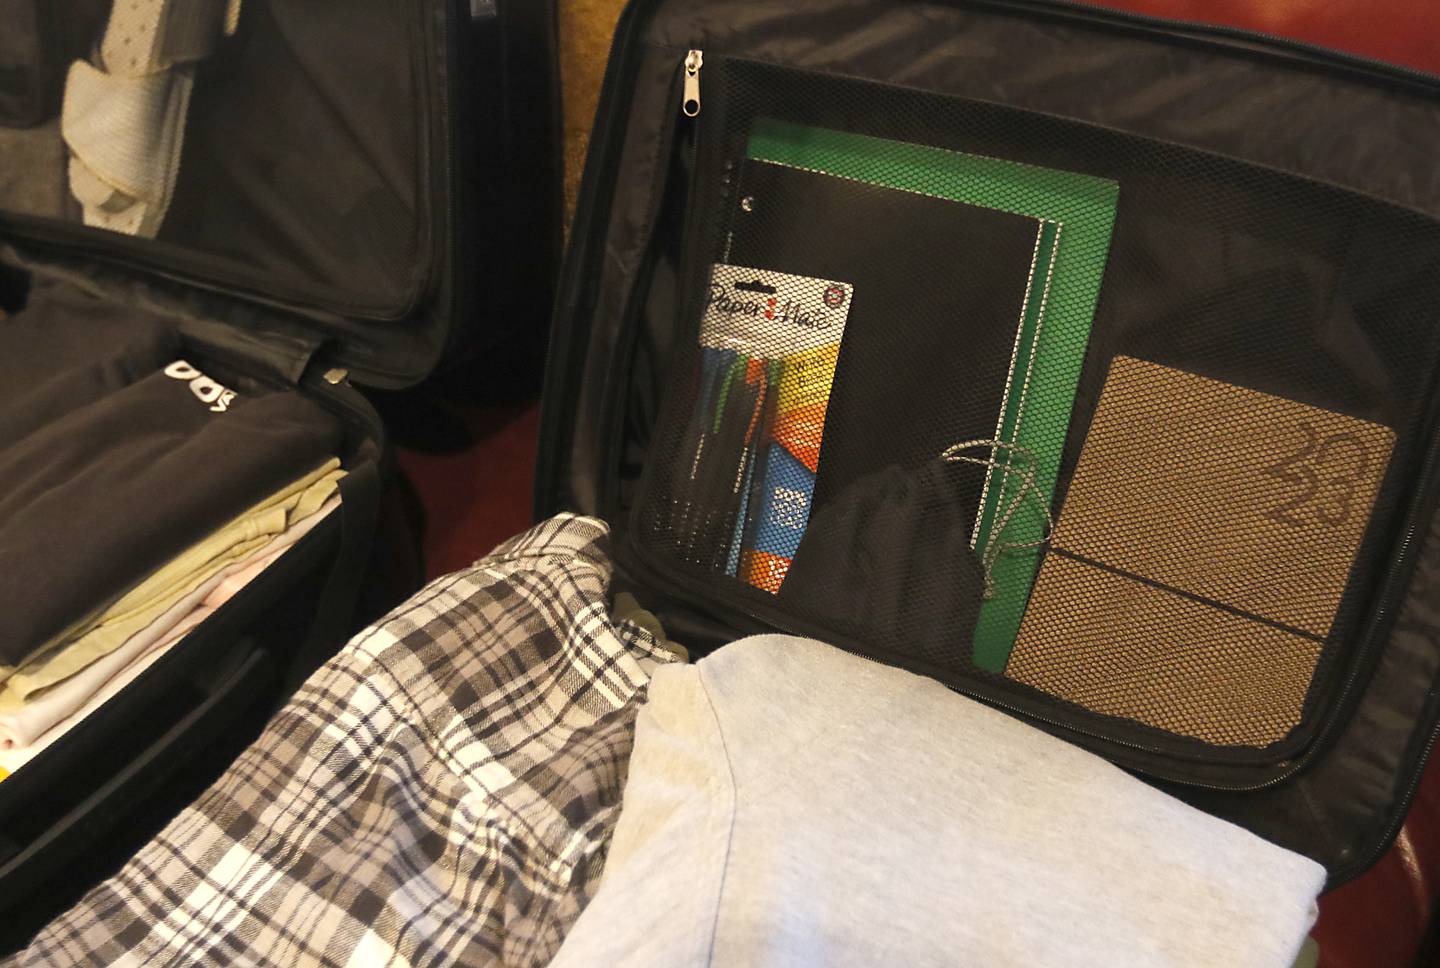 School supplies that Brady Bird of Lake in the Hills has packed in his suitcase Thursday, Jan. 19, 2023, as he prepares to travel to Canterbury Christ Church University in Canterbury, England. Bird is going to be McHenry County College's first study abroad student since March 2020.